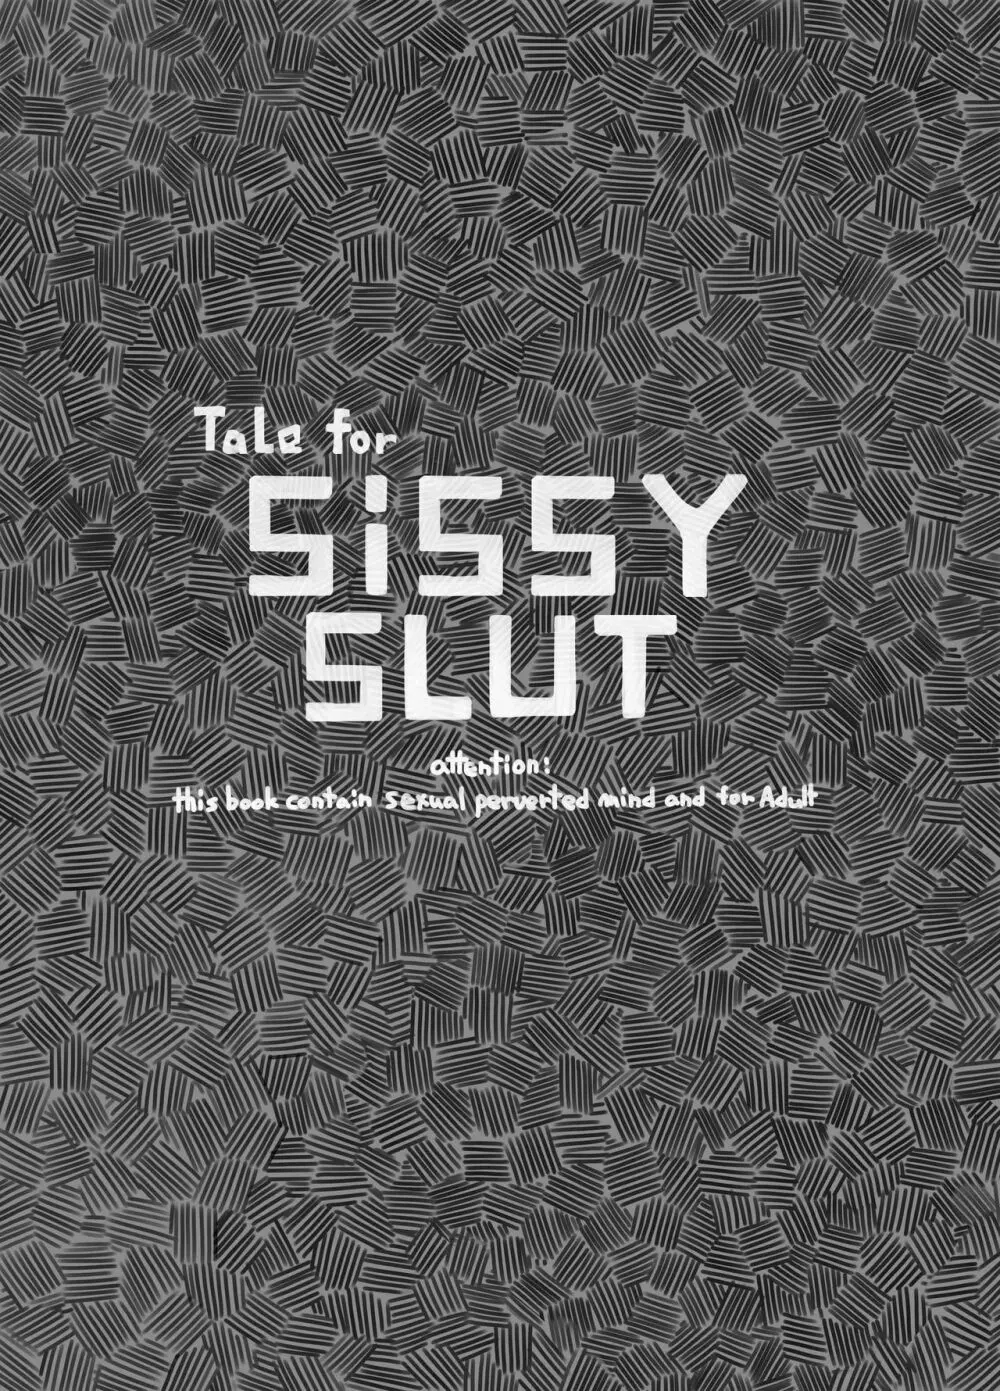 Tale for SiSSY SLUT Page.1